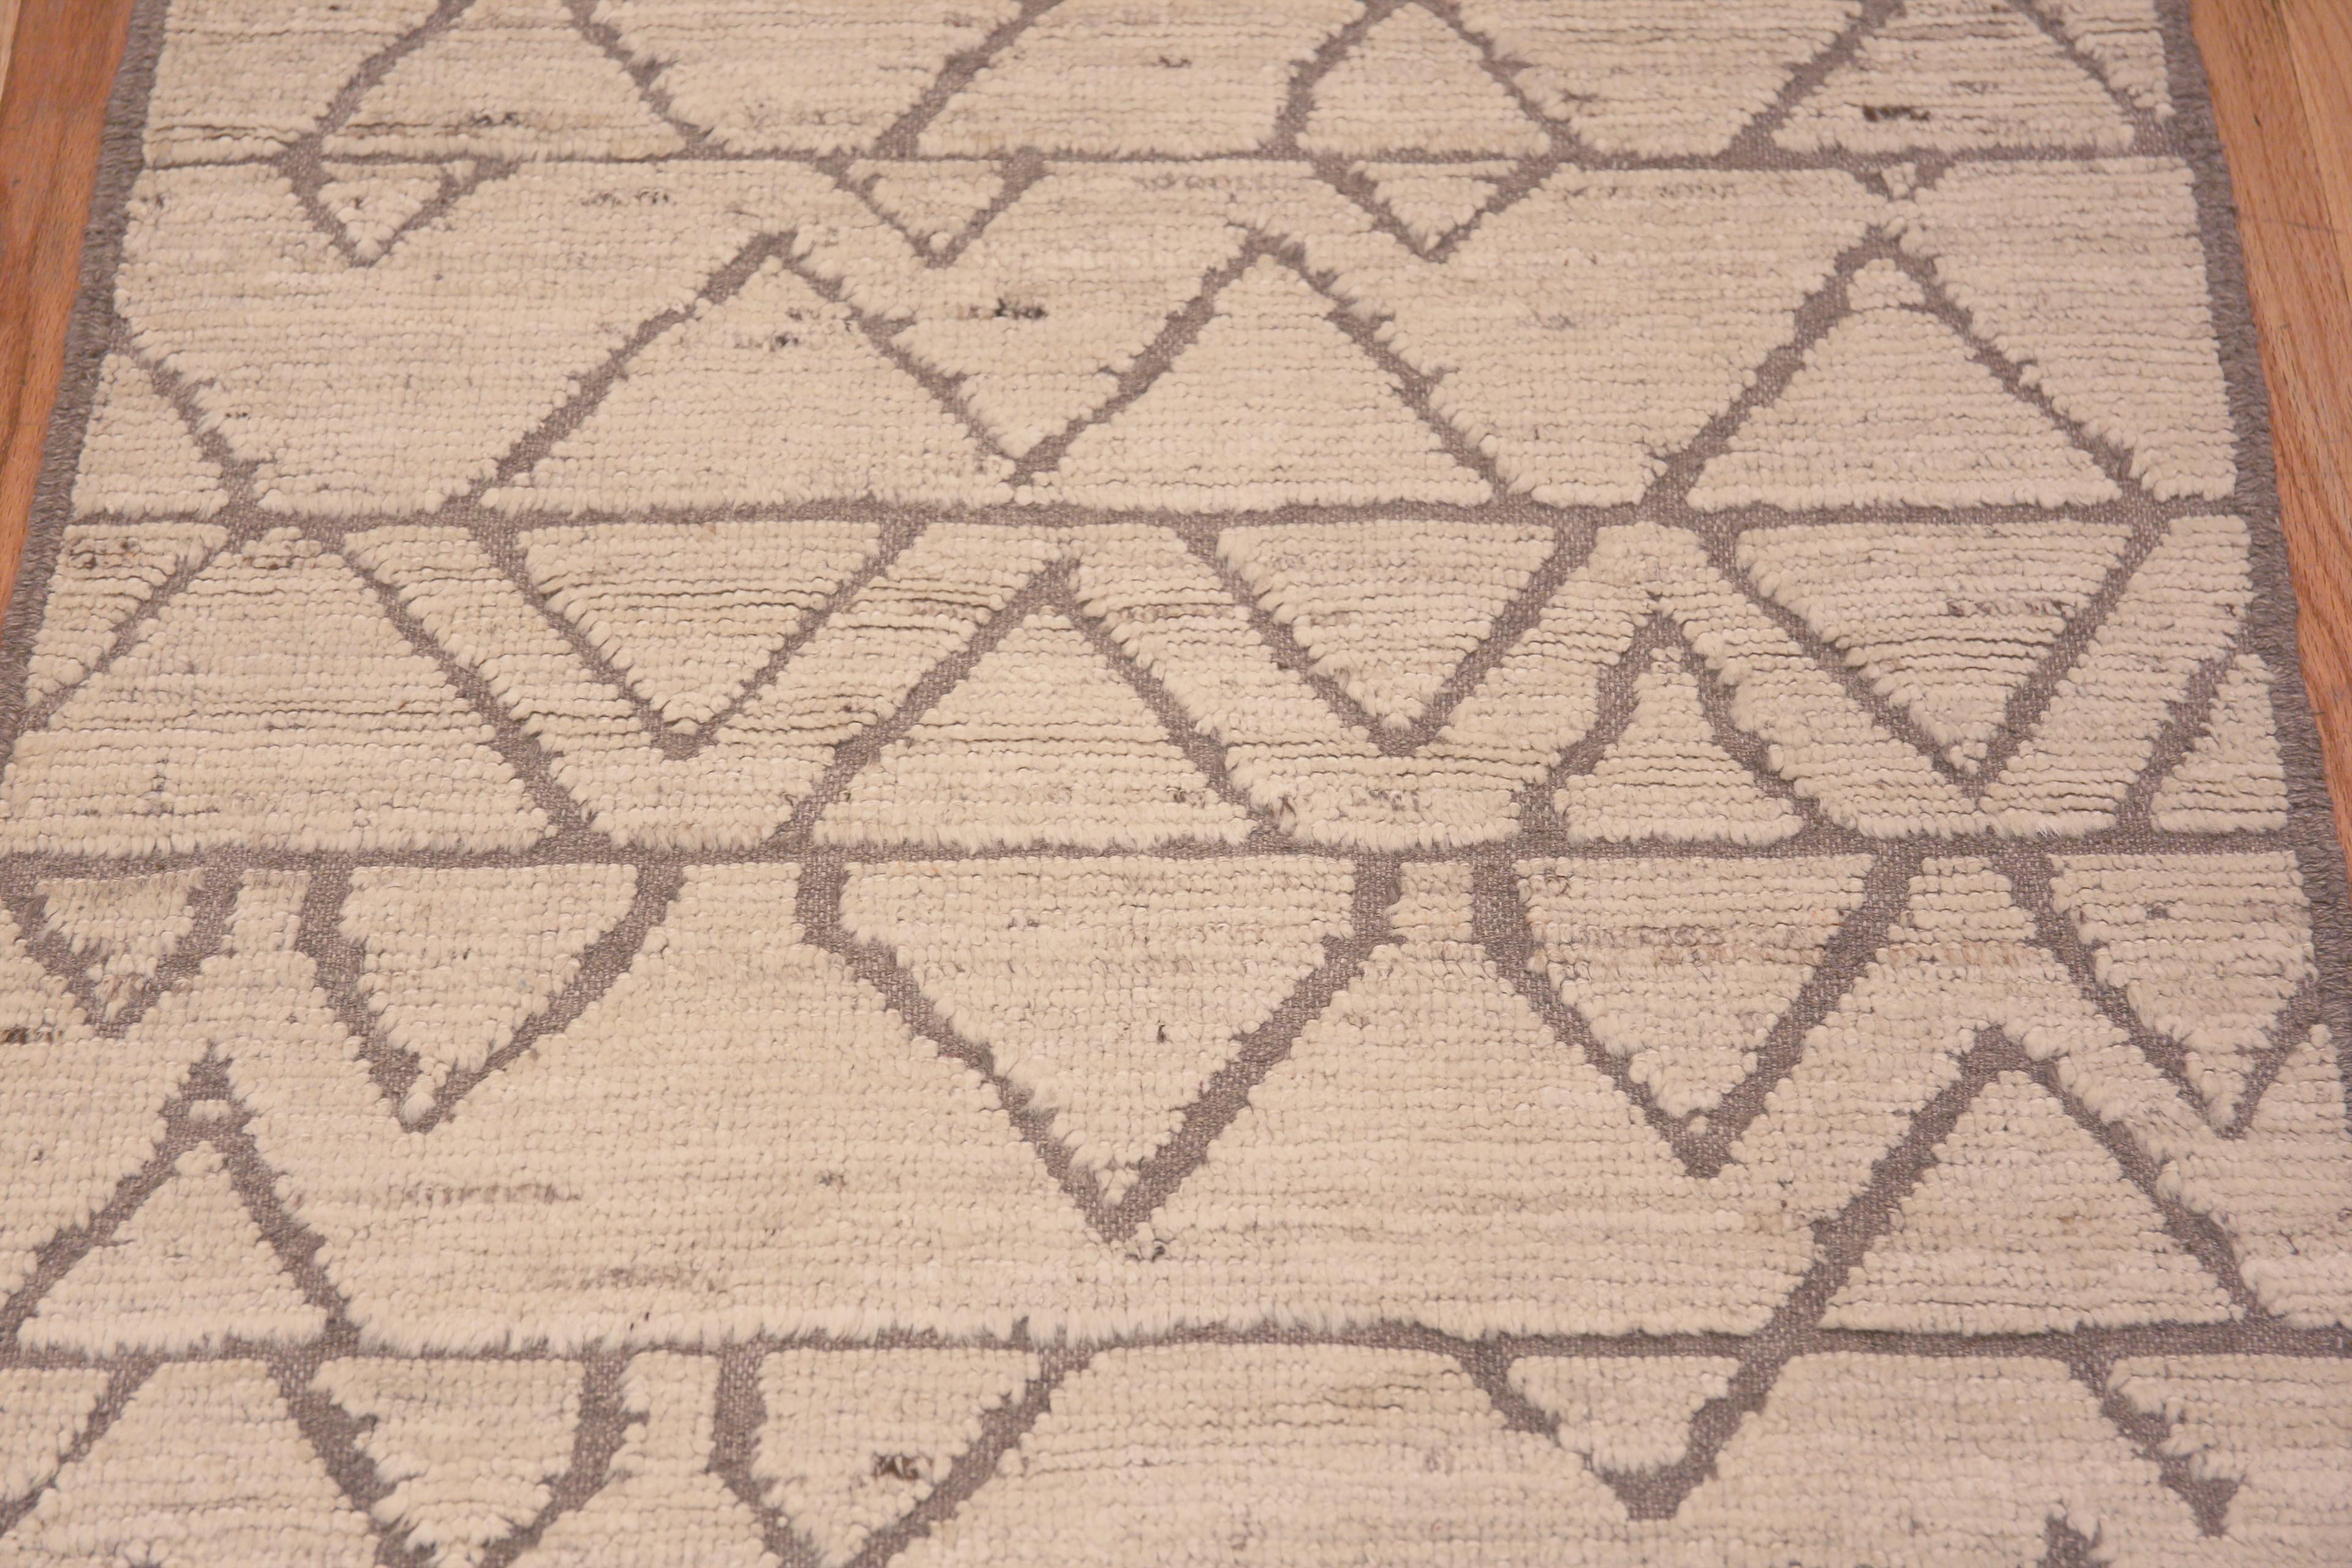 Central Asian Nazmiyal Collection Ivory Neutral Geometric Tribal Modern Runner Rug 3' x 9'6